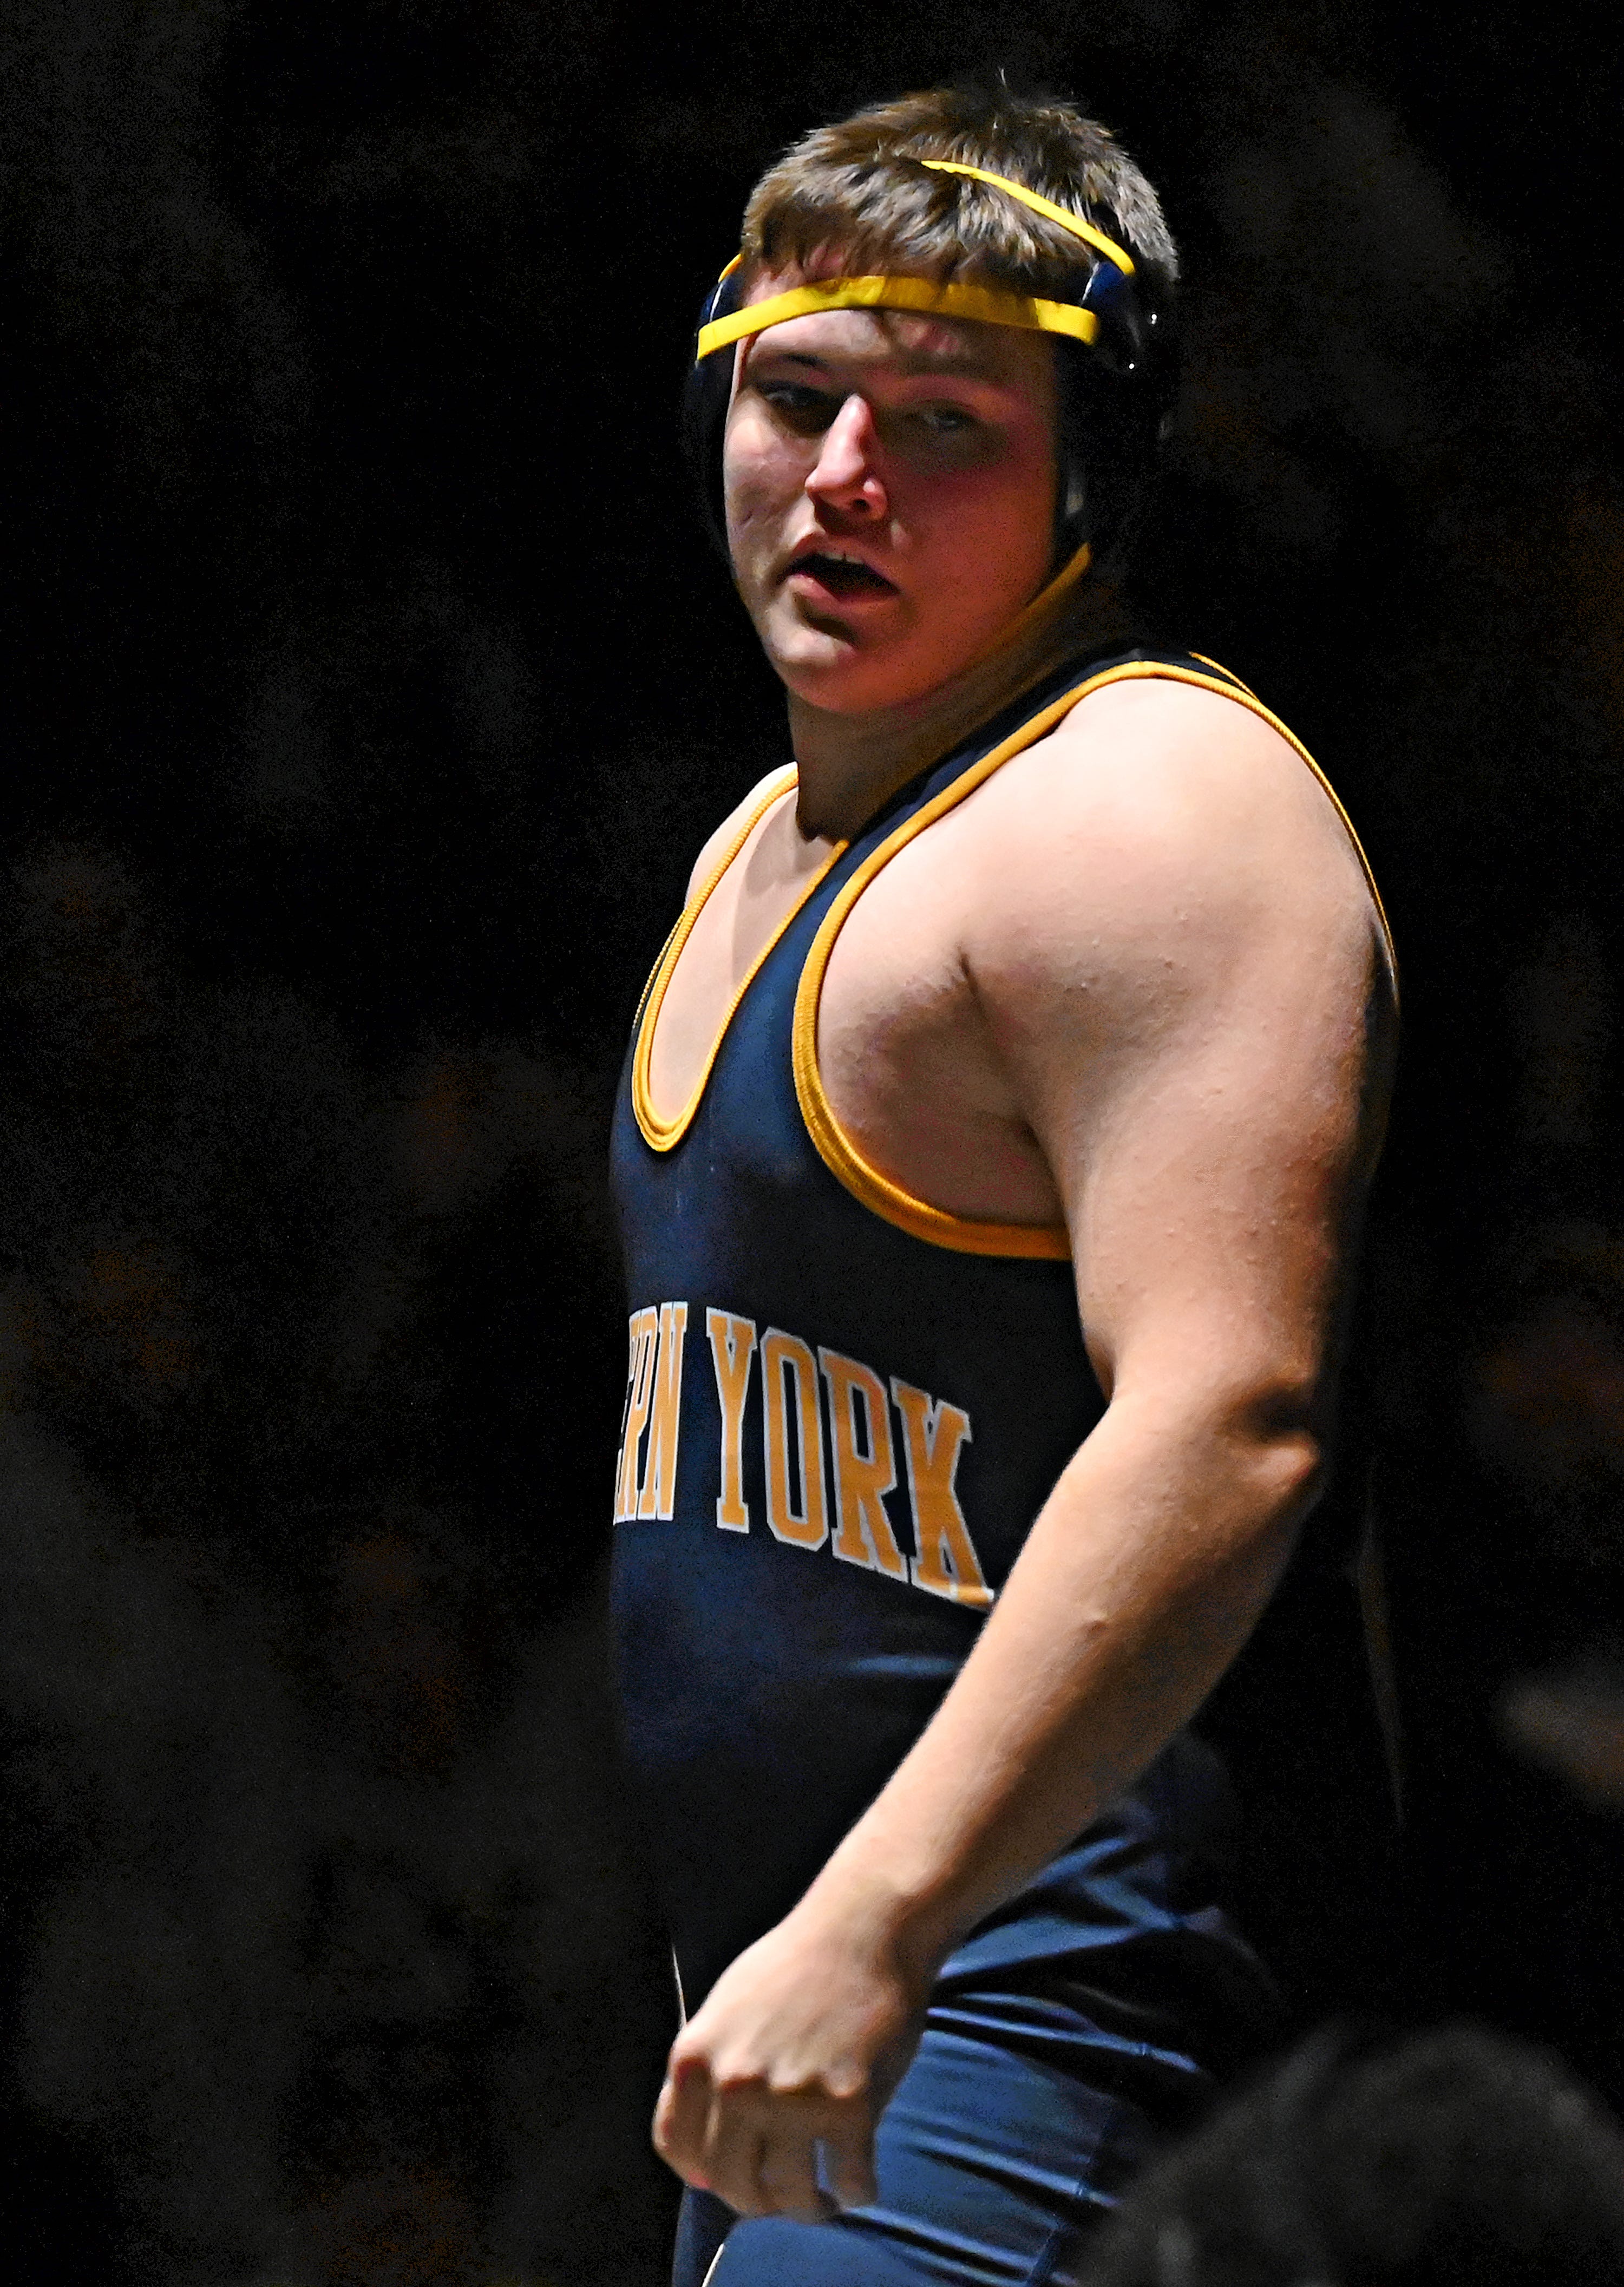 Eastern York’s Bryce Myers in the 285-pound weight class during PIAA District 3, Class 2-A first round wrestling action at Eastern York High School in Lower Windsor Township, Monday, Jan. 30, 2023. Myers would win with a pin at 0:35 and Eastern York would win the meet 50-22. Dawn J. Sagert photo